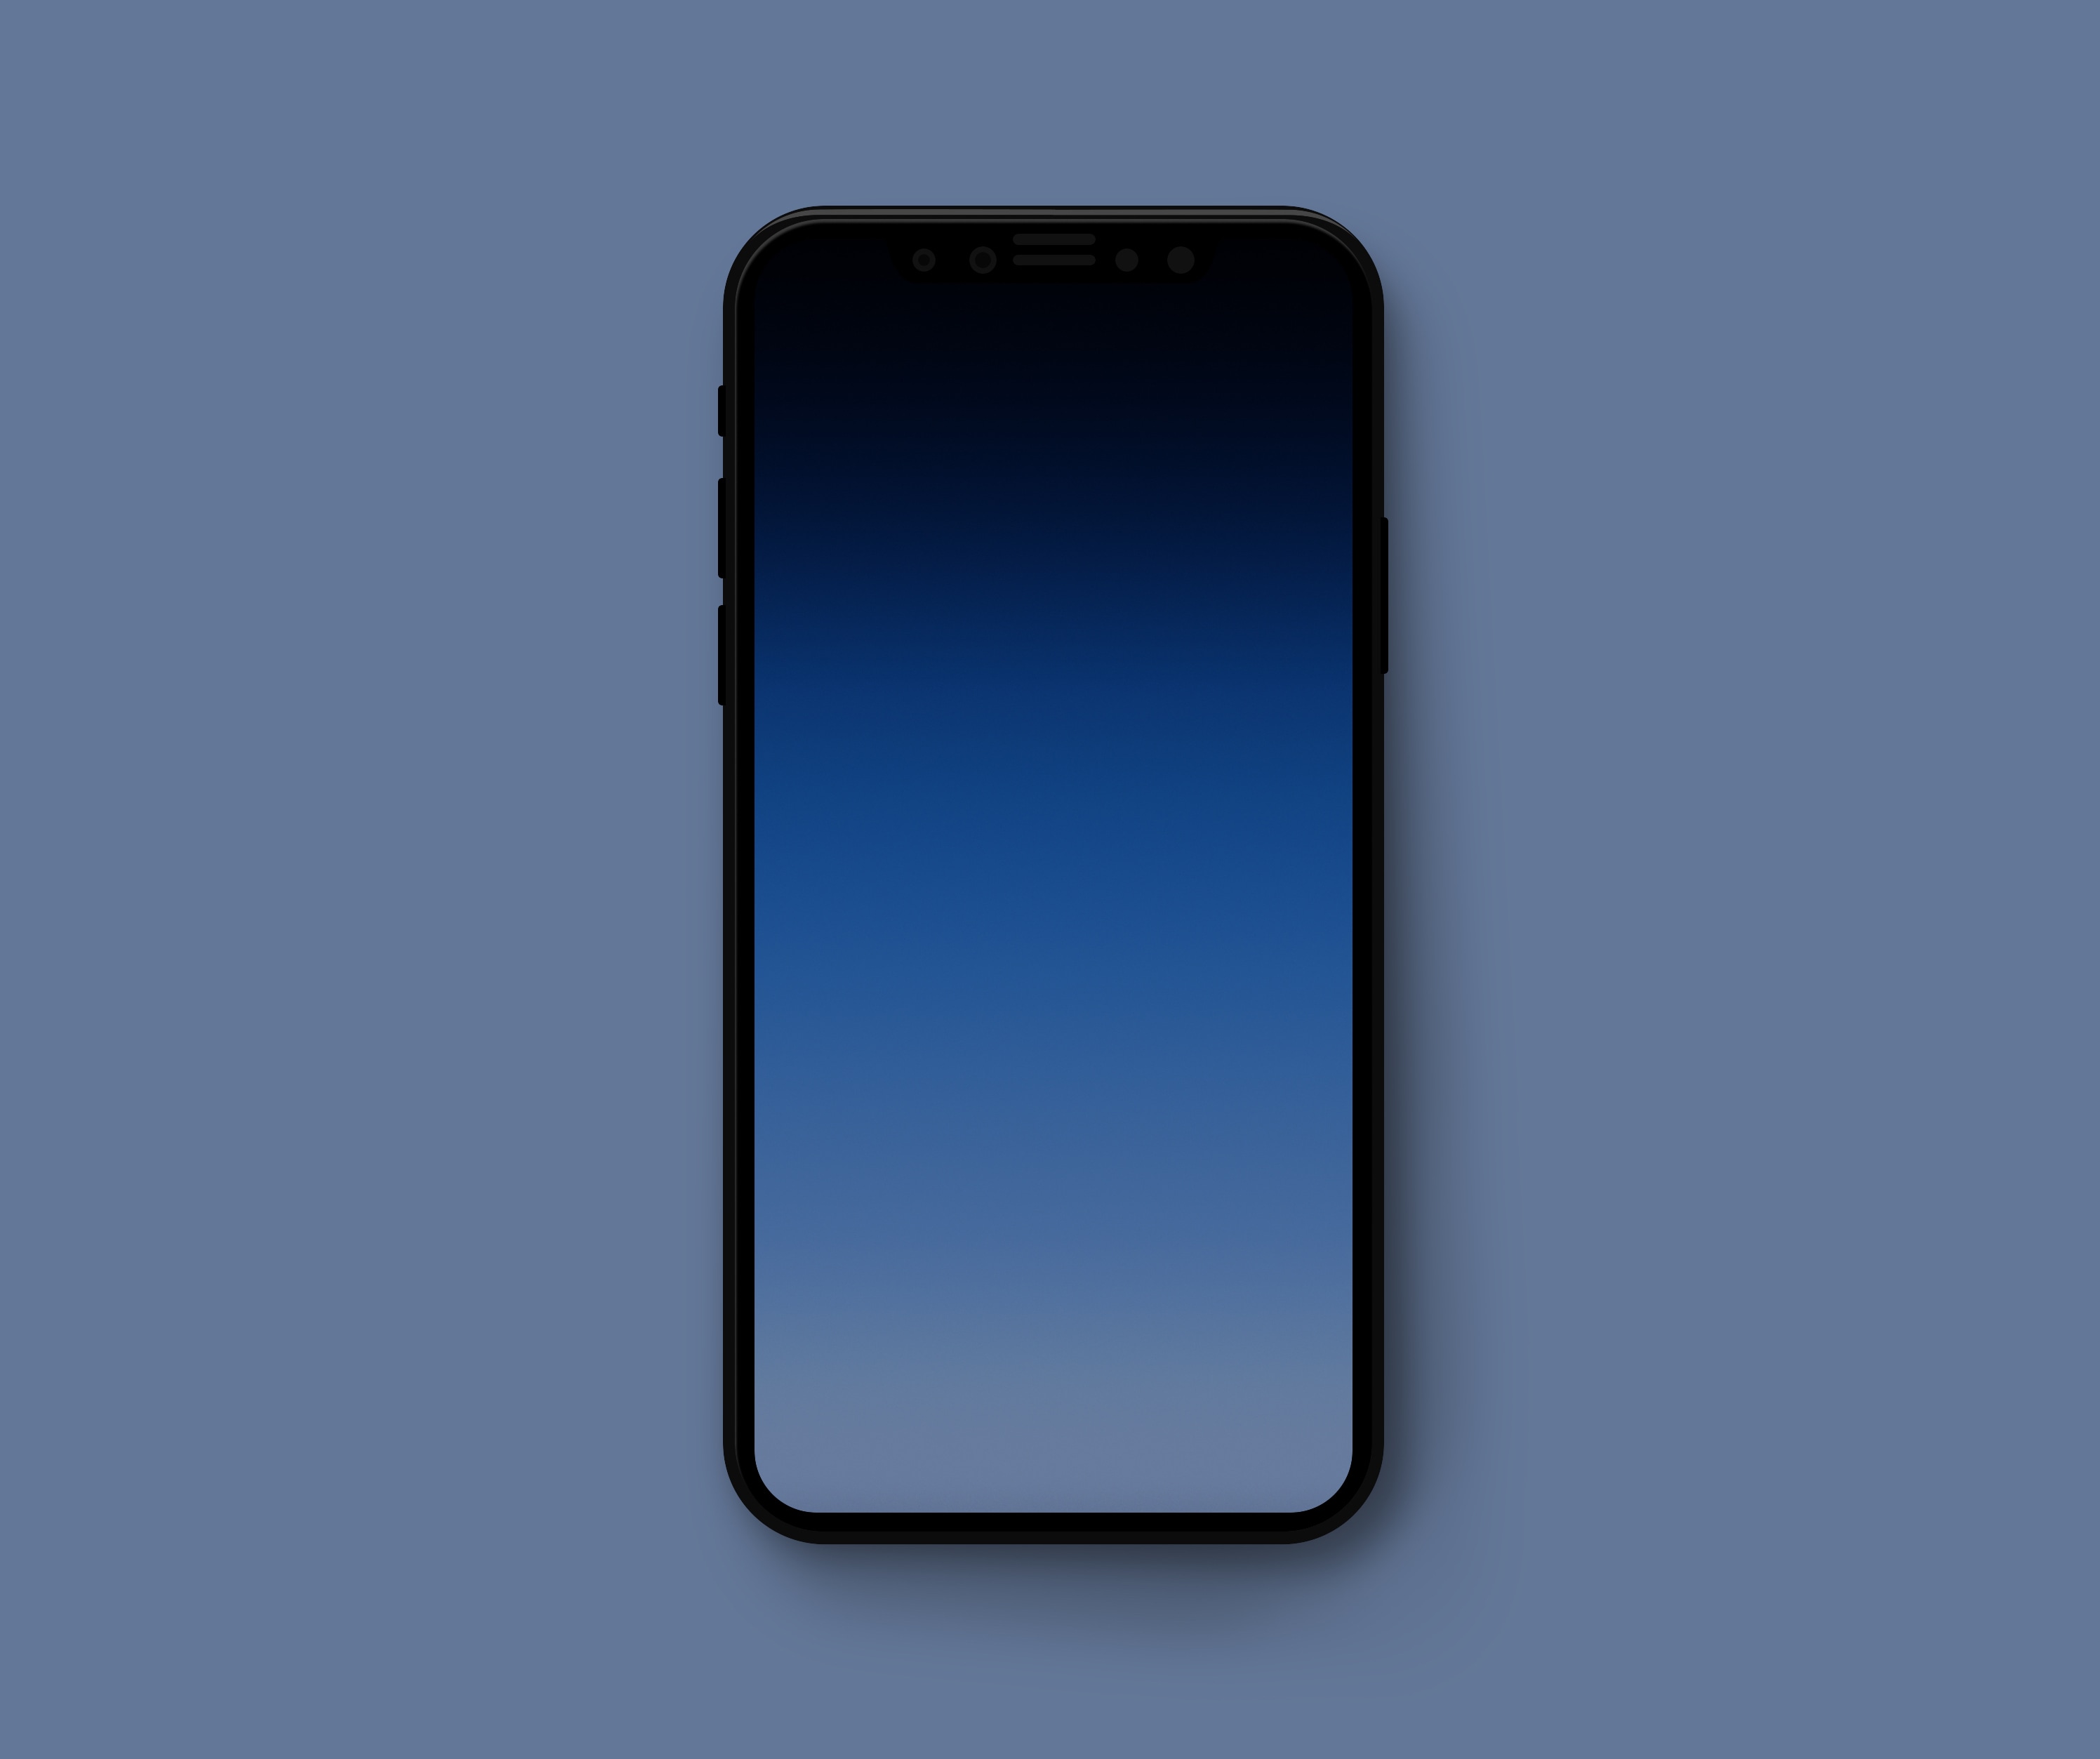 Minimal Gradient Wallpapers To Hide The Iphone X Notch